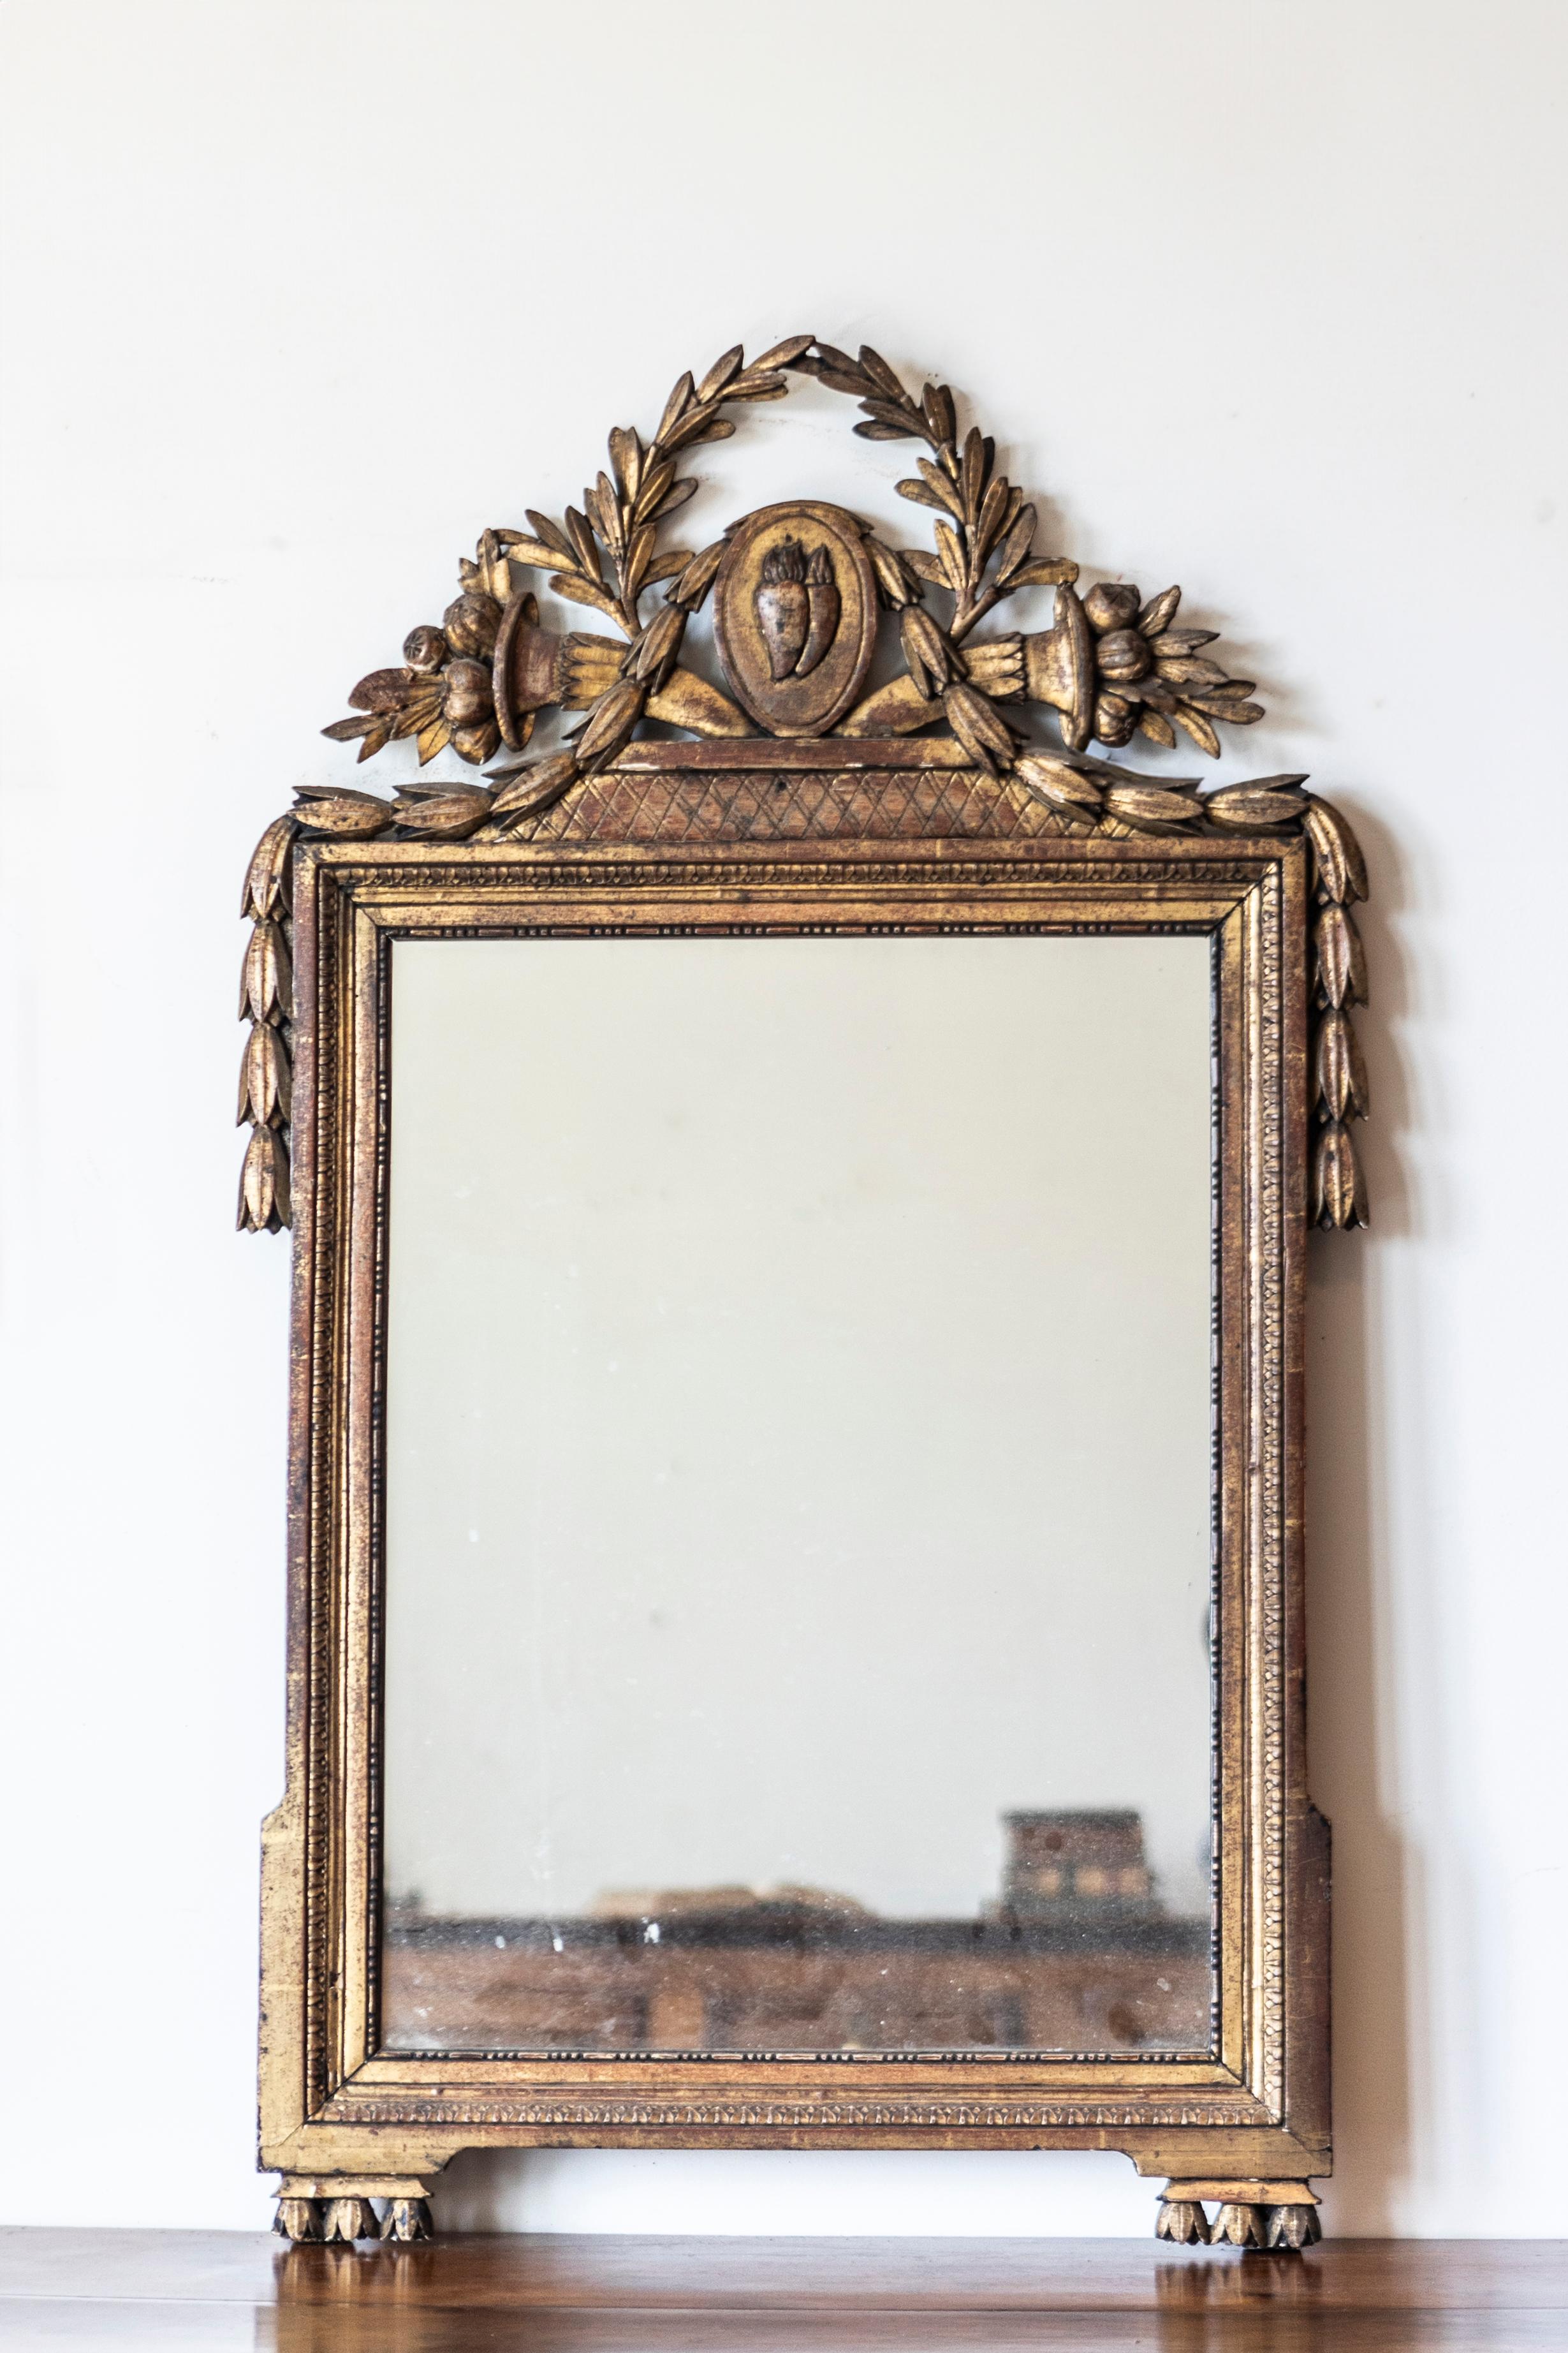 French Louis XVI Period 18th Century Giltwood Mirror with Carved Hearts on Fire For Sale 4